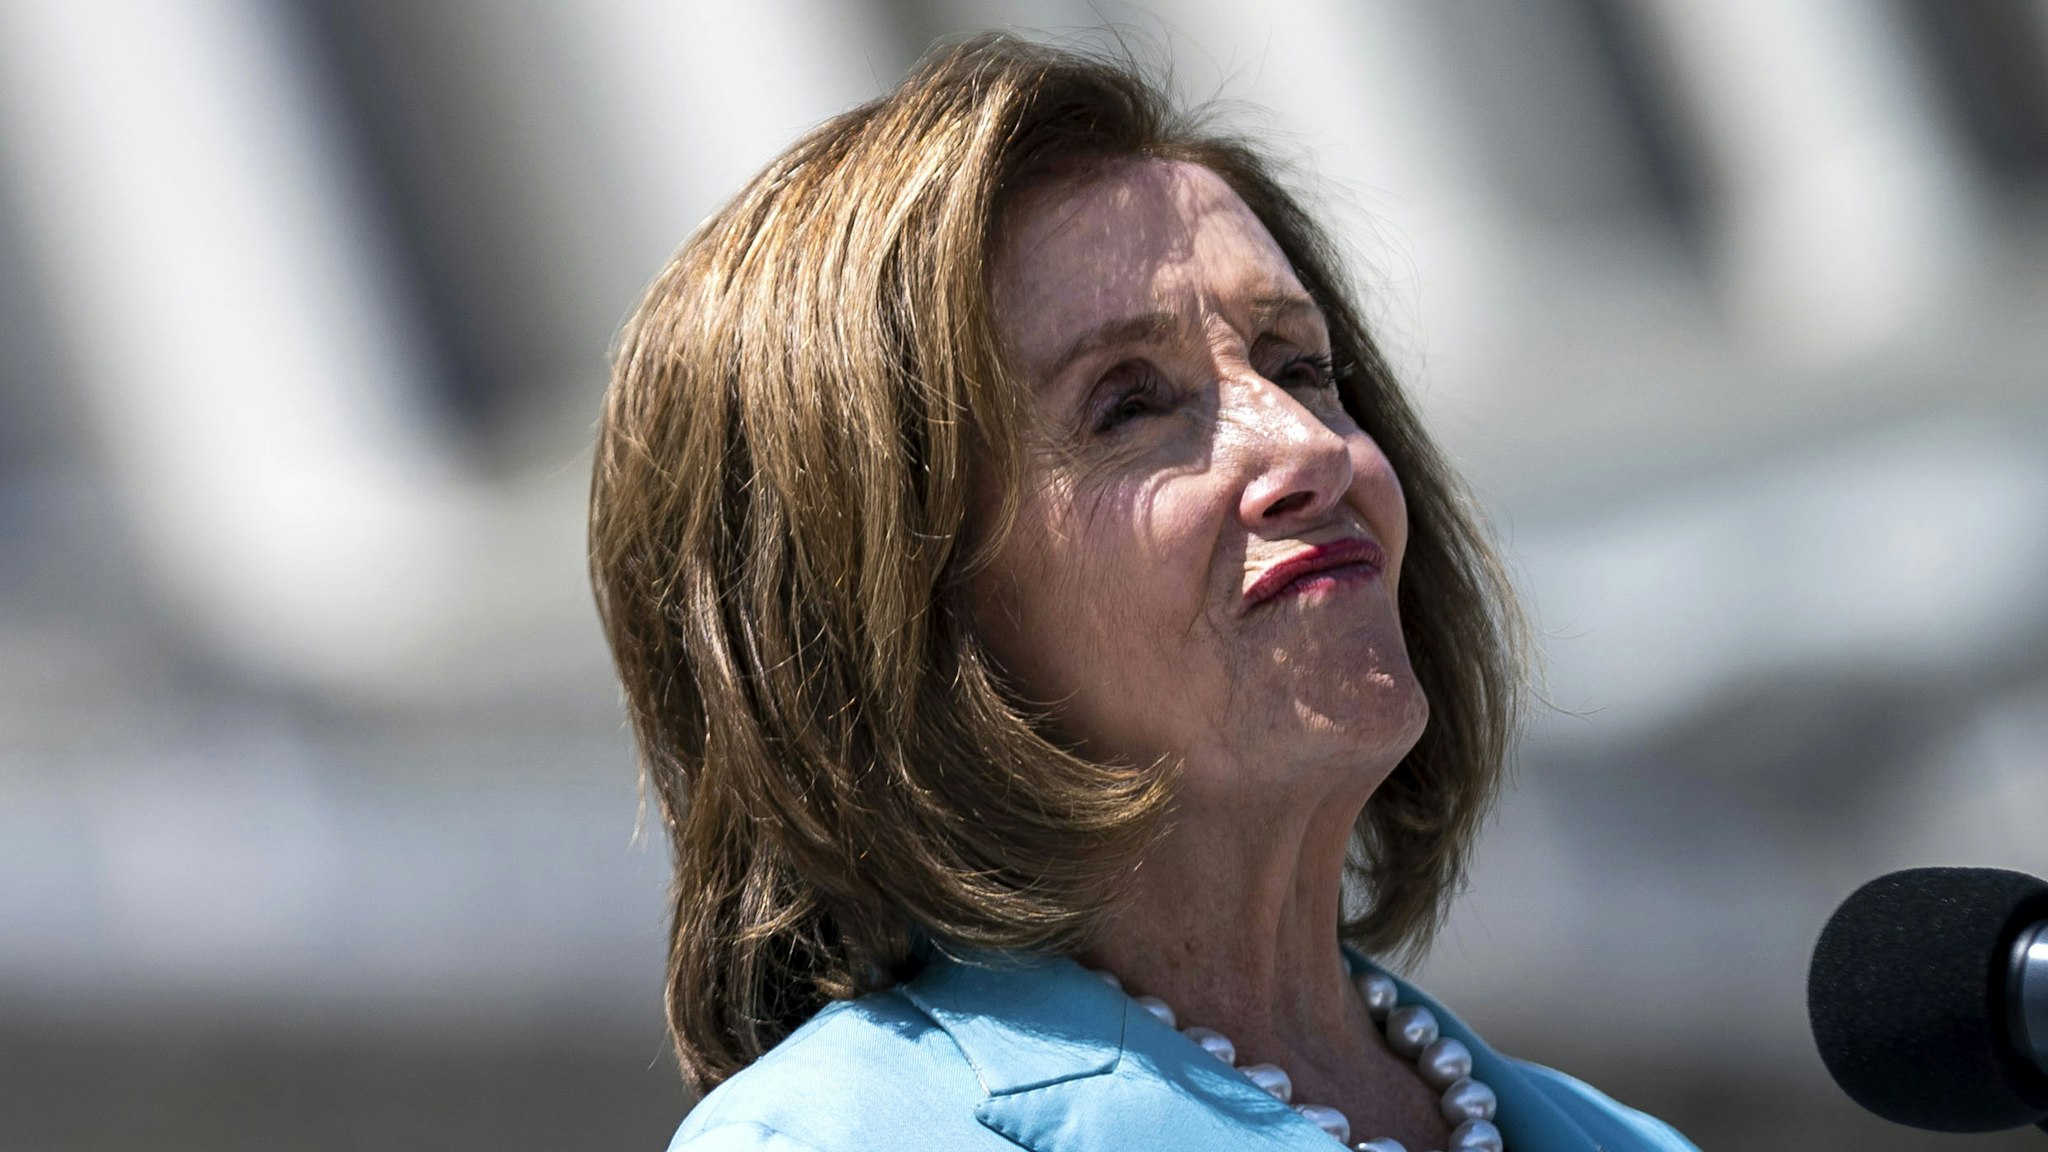 Washington, DC - May 19 : Speaker of the House Nancy Pelosi of Calif., speaks during a news conference about gun violence, replacement theory, and the recent mass shooting in Buffalo, on Capitol Hill on Thursday, May 19, 2022 in Washington, DC.